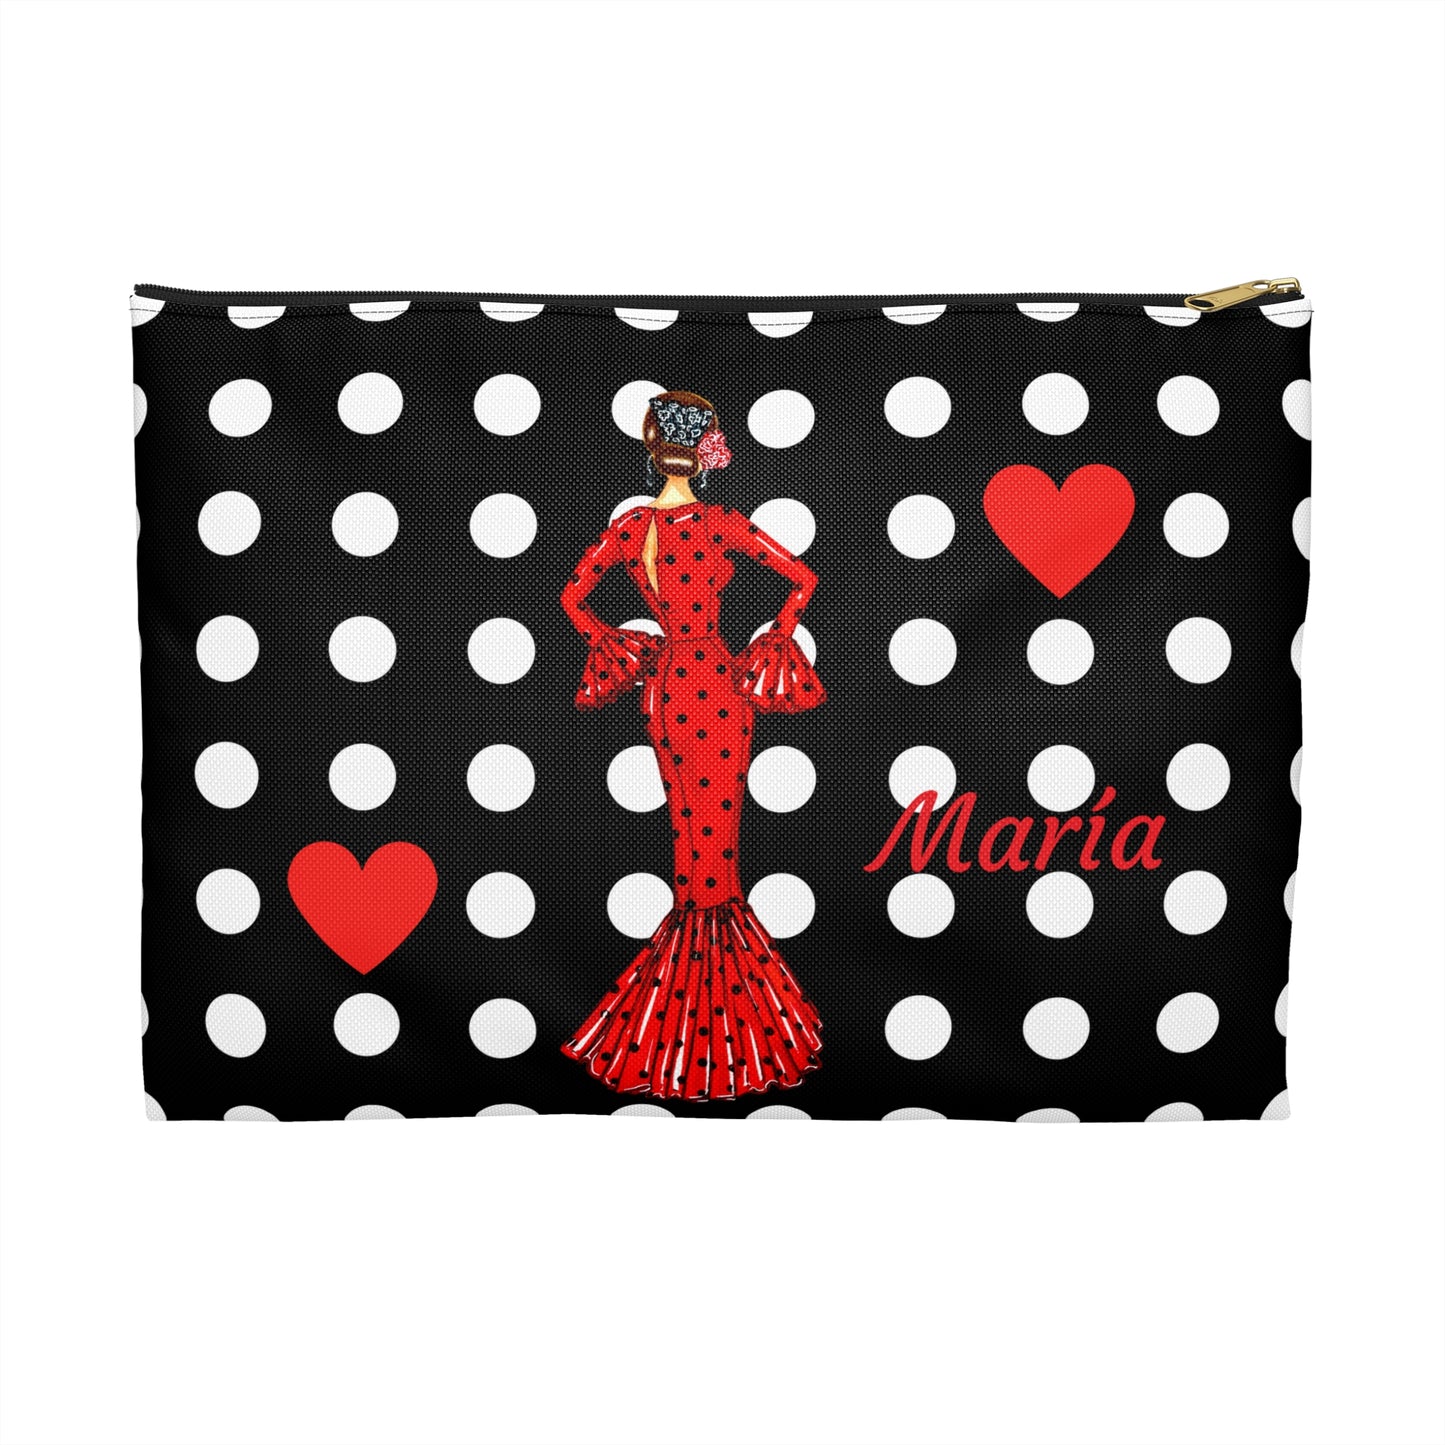 a black and white polka dot bag with a lady in a red dress